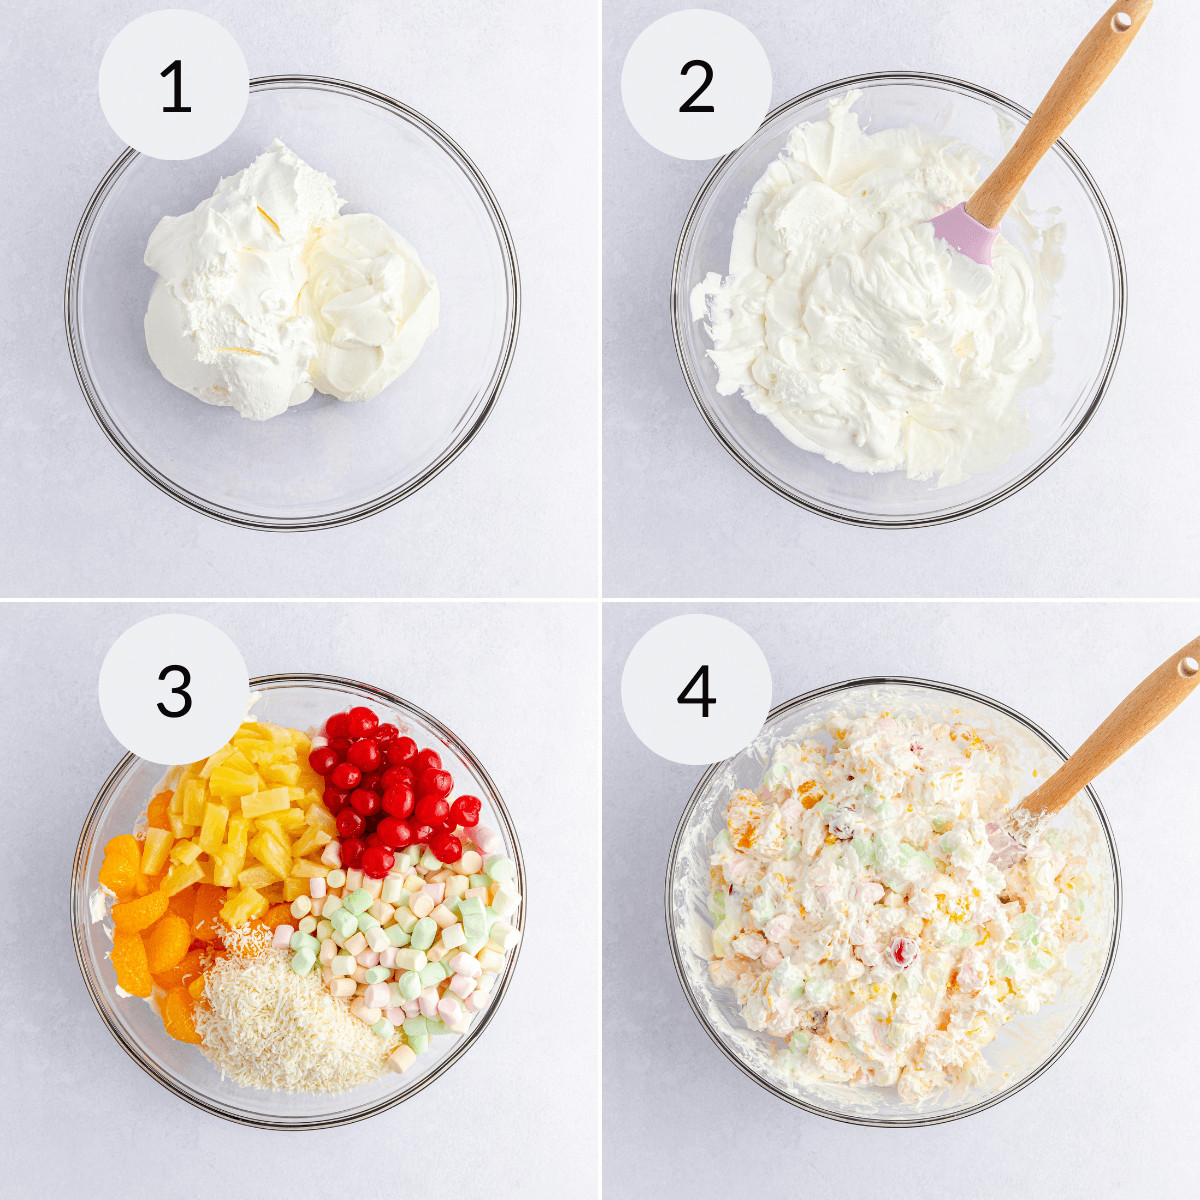 Placing the yogurt in a bowl, adding the fruit and marshmallows and blending together.